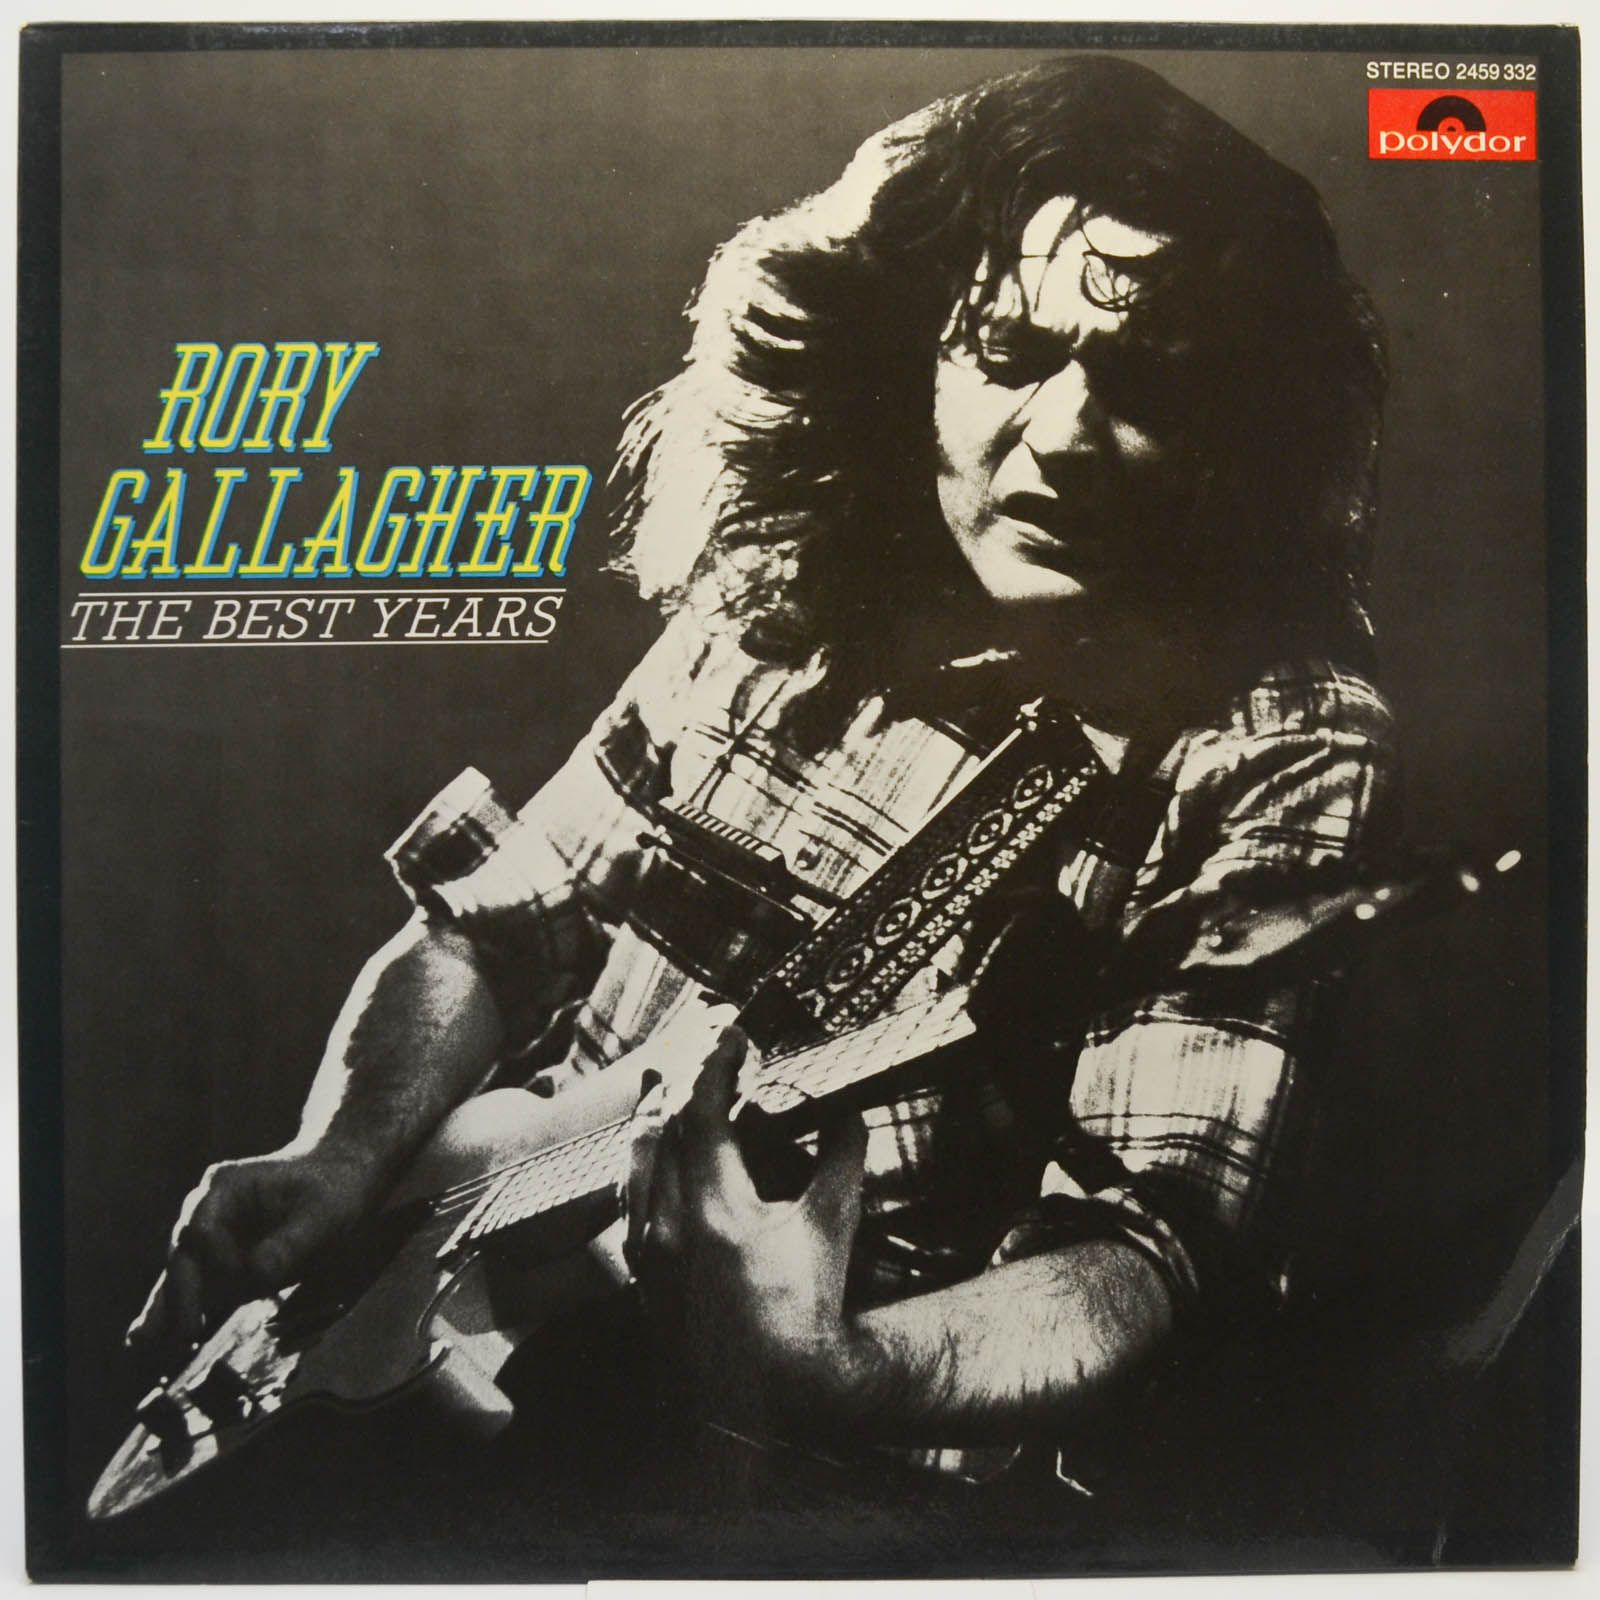 Rory Gallagher — The Best Years, 1977